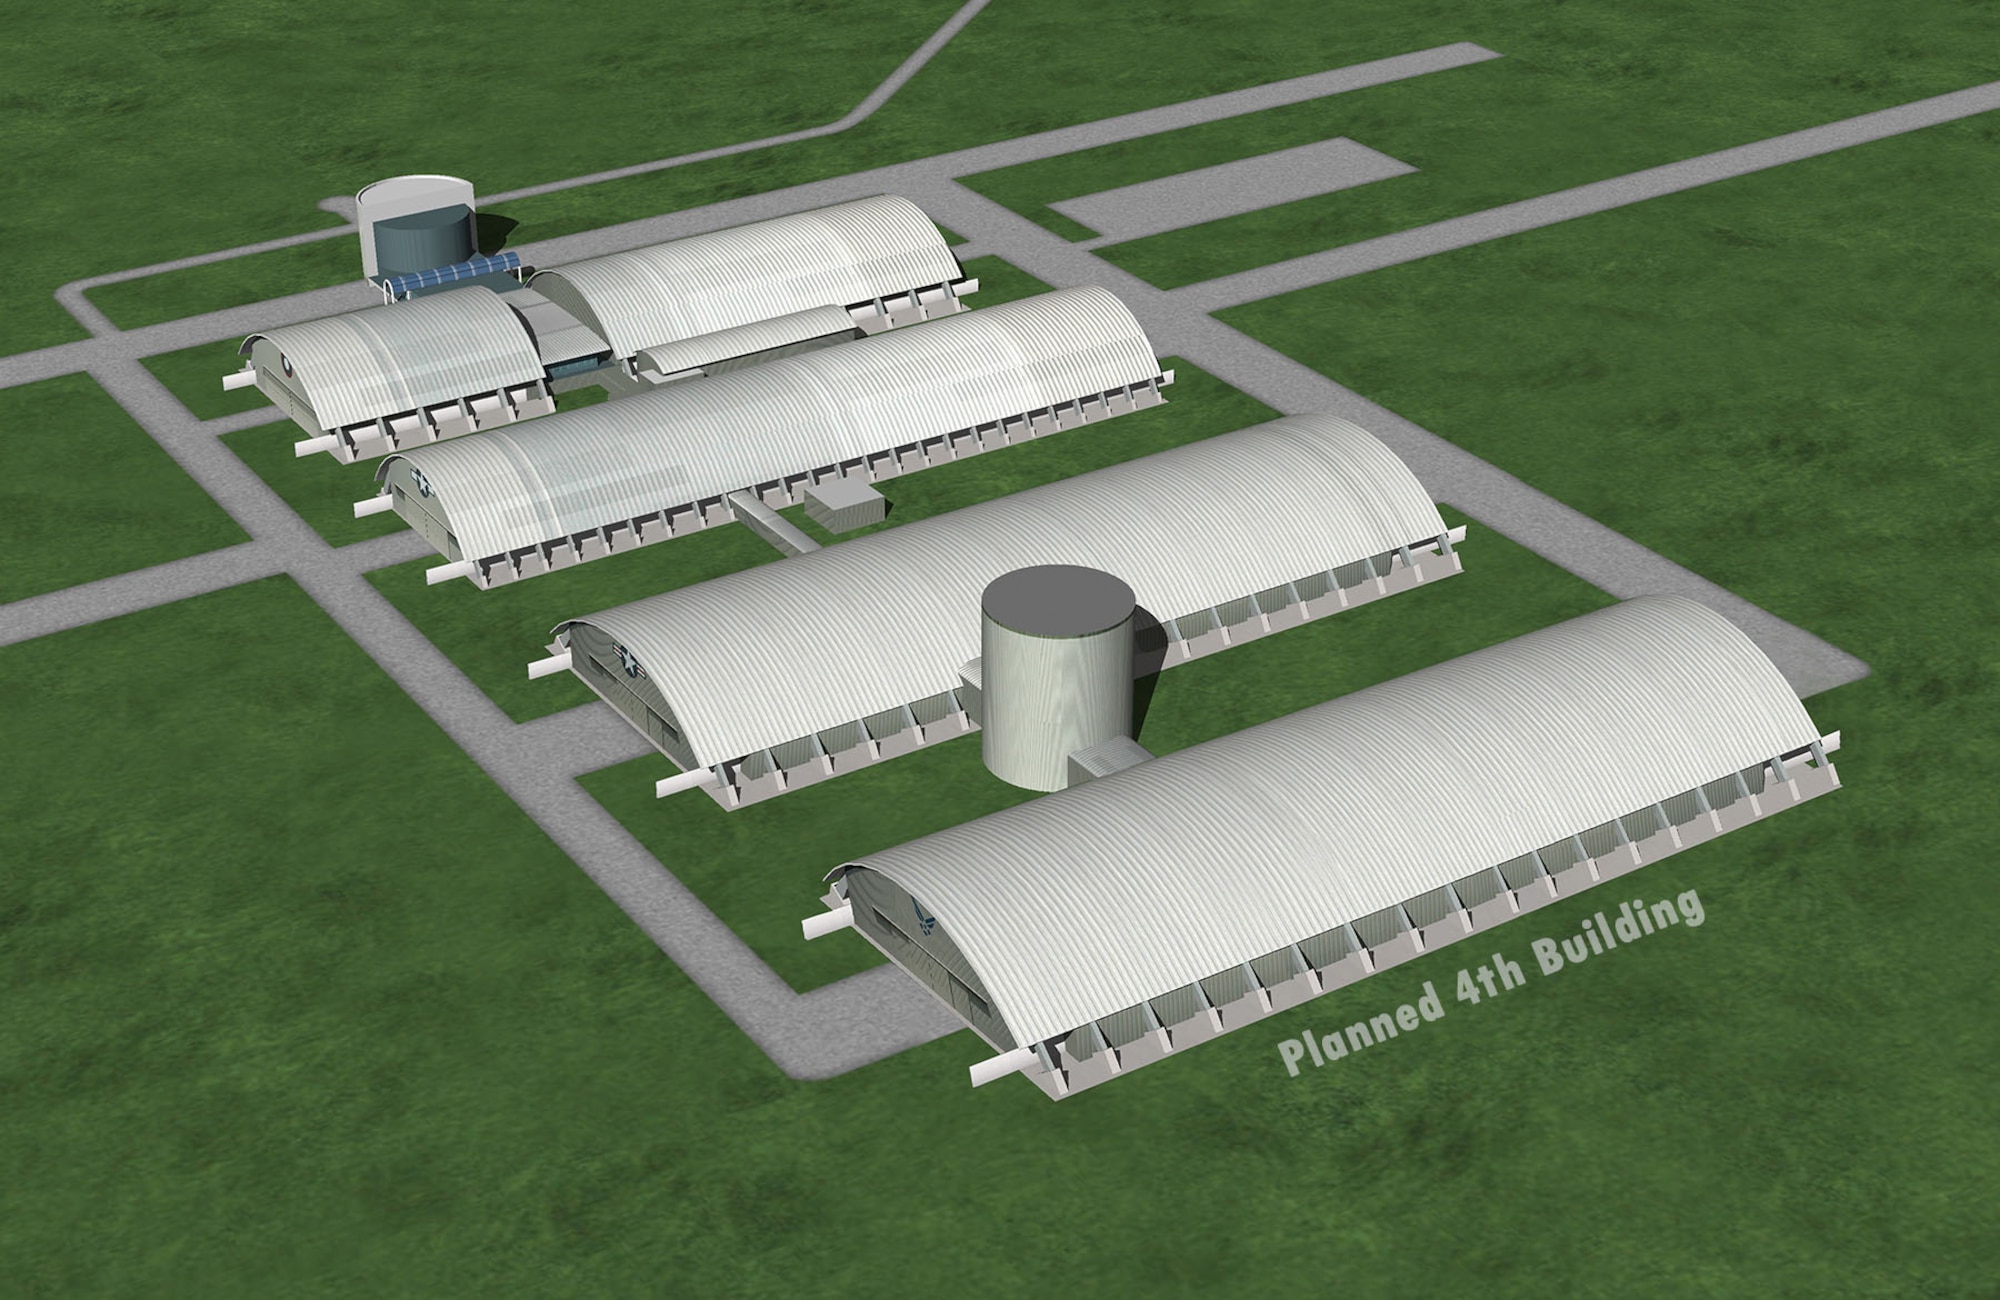 The 2013 rendering of the National Museum of the U.S. Air Force expansion at Wright-Patterson Air Force Base in Dayton, Ohio. 